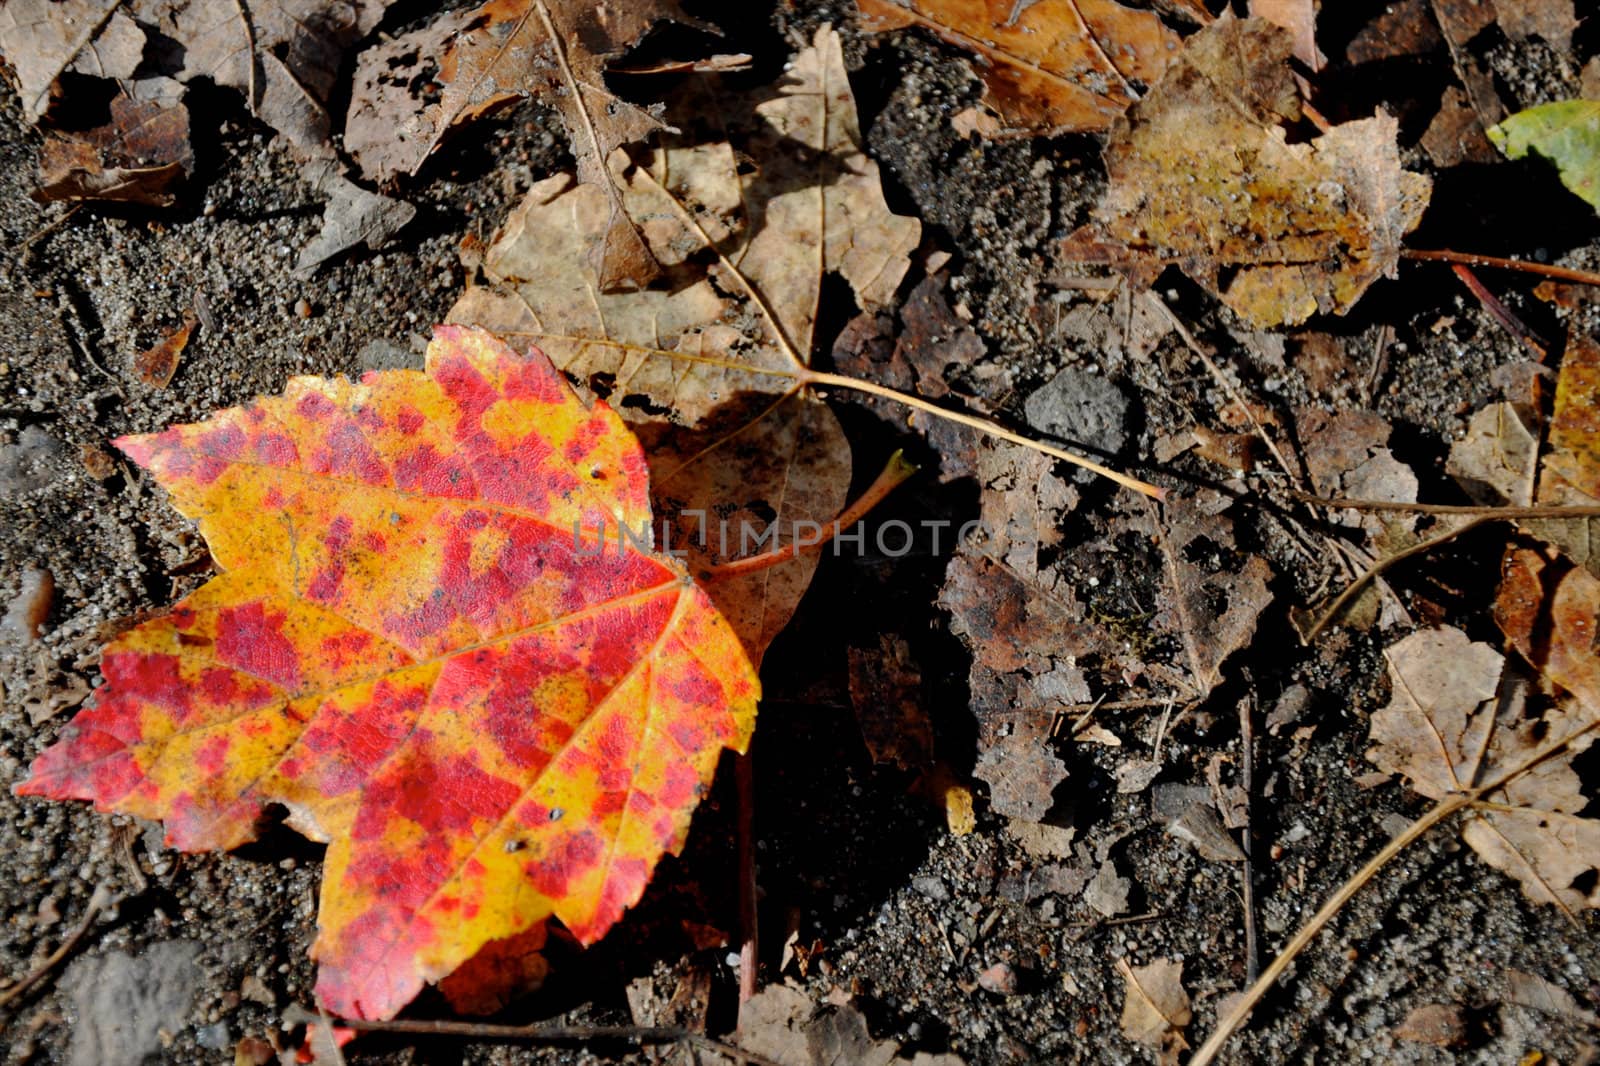 Fallen Maple Leaf in a forest in Quebec.